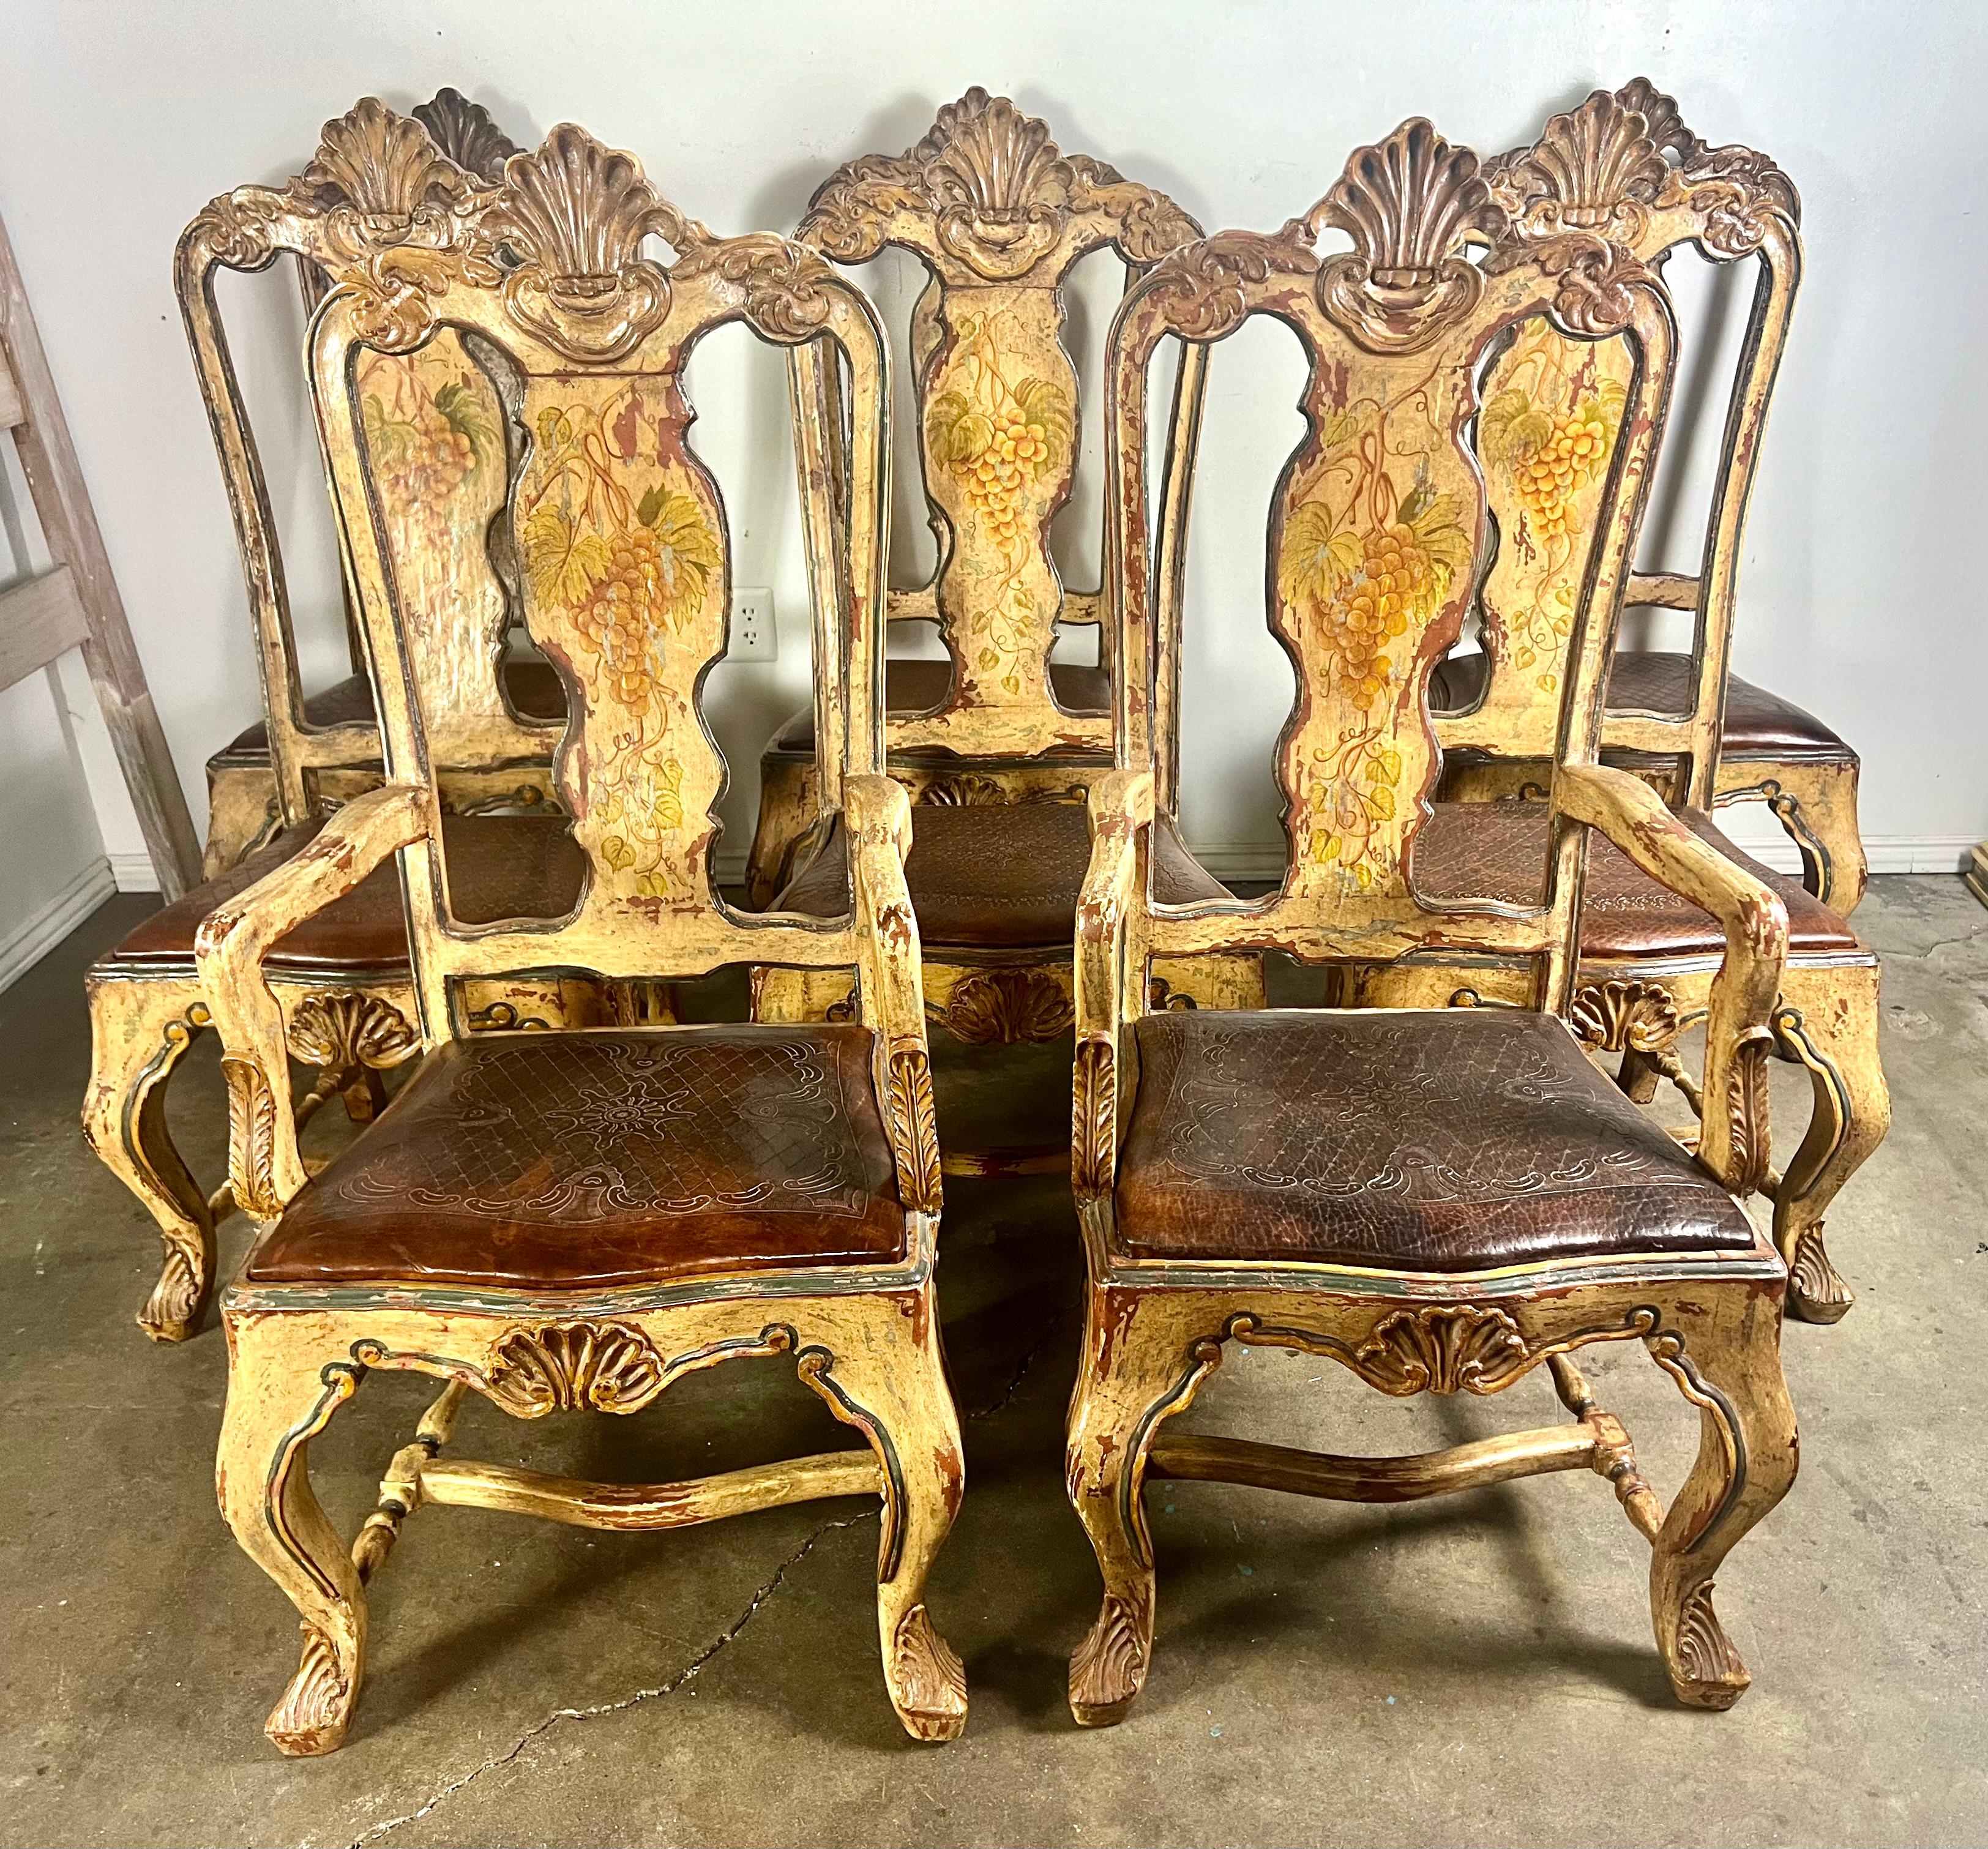 Set of eight hand painted French Provincial style dining chairs with leather embossed seats.  The chairs stand on four cabriole legs with carved feet.  There is a carved shell motif at the top of the backs and on the apron of the chairs.  A bottom